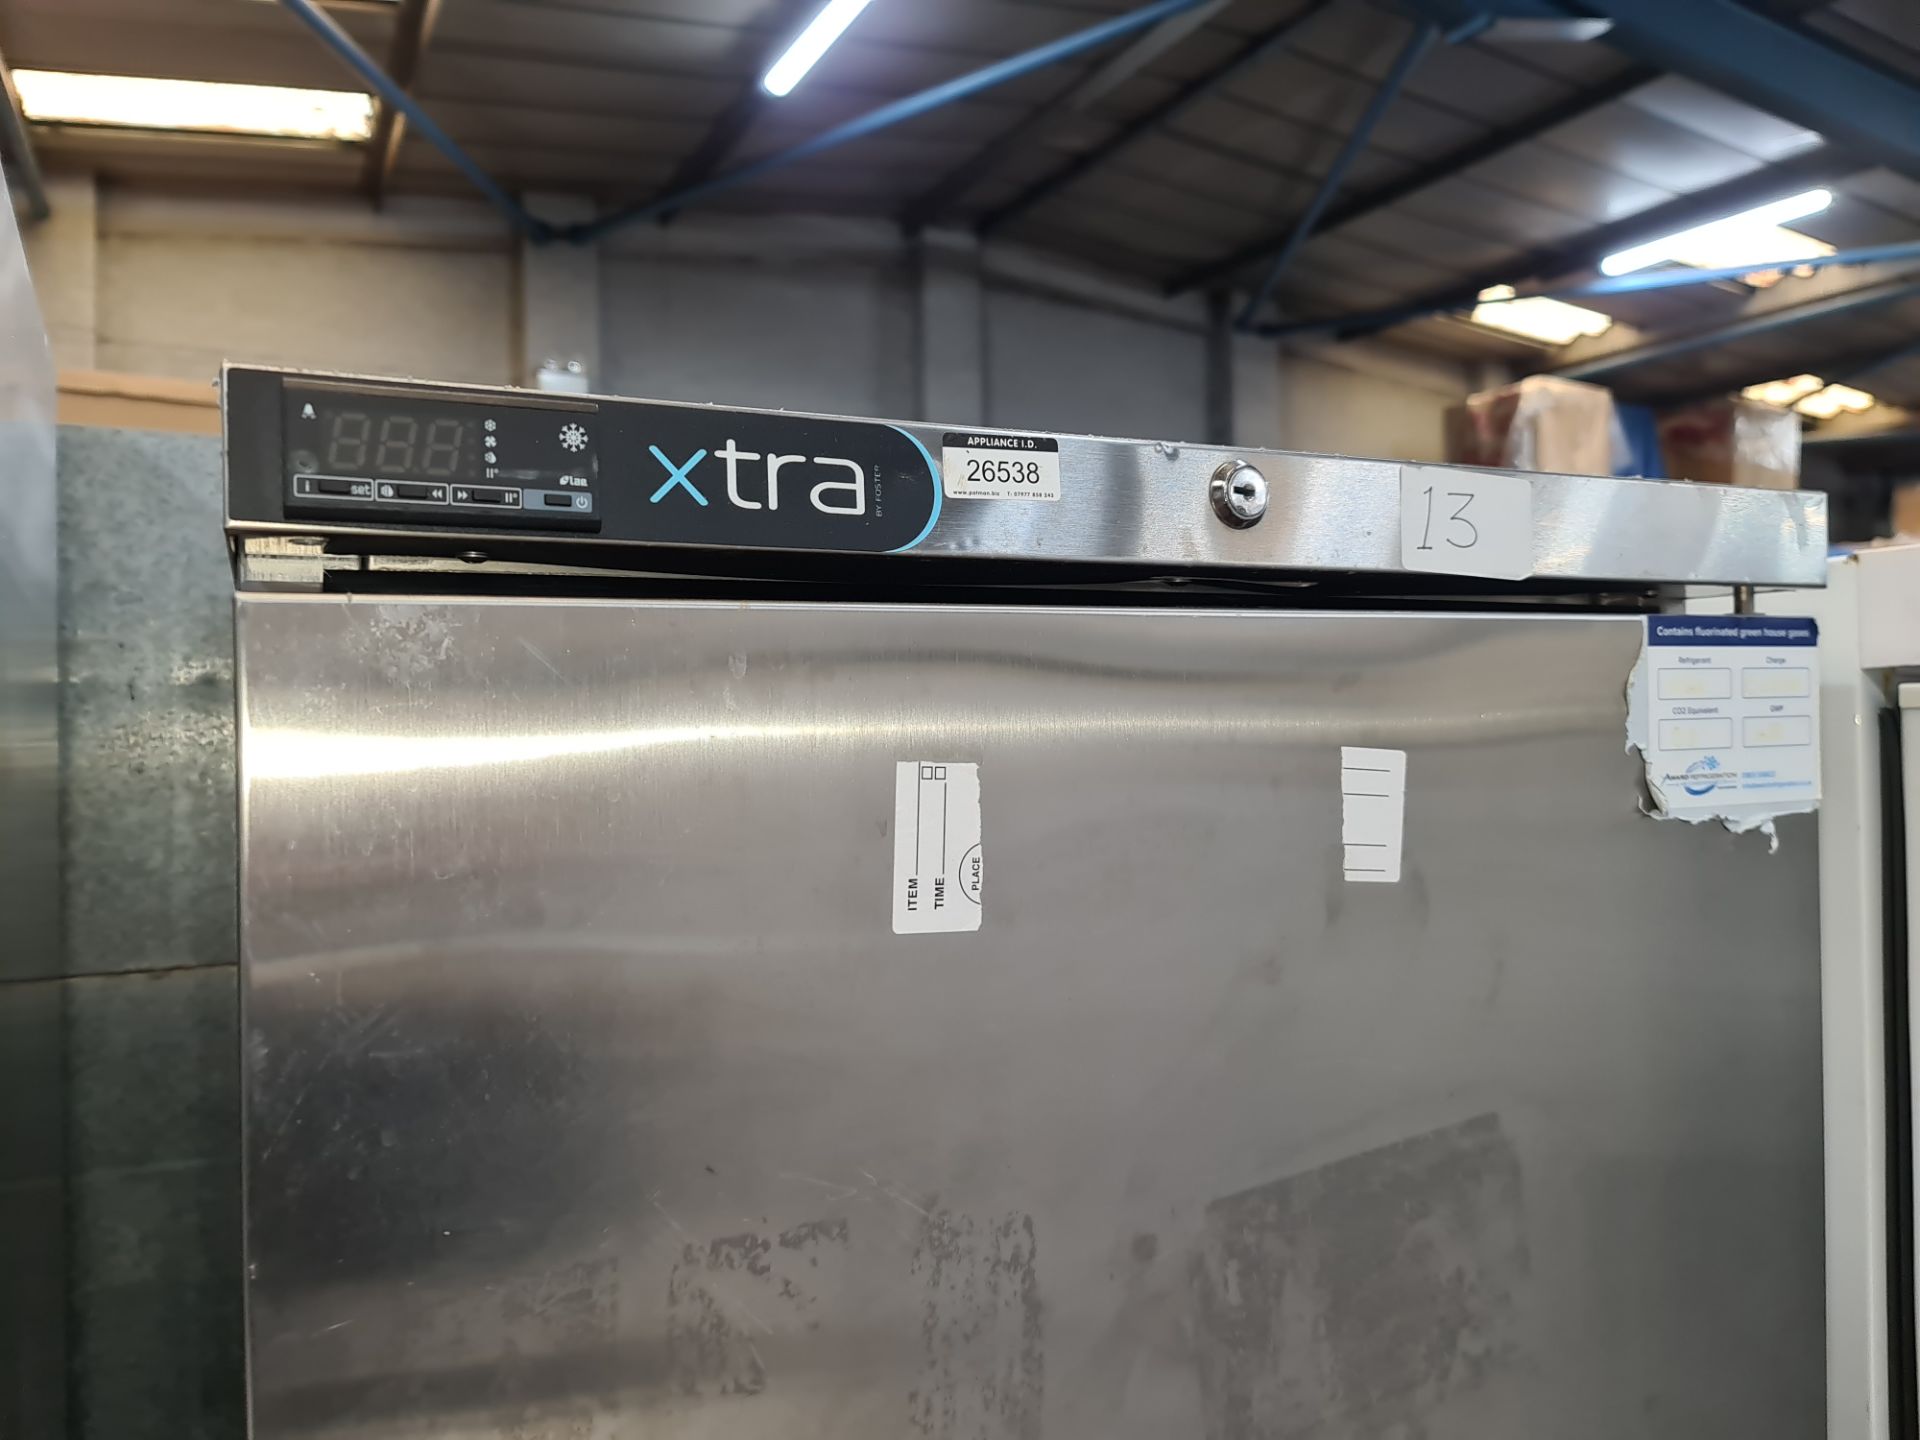 Xtra stainless steel commercial freezer, model XR415L - Image 2 of 5